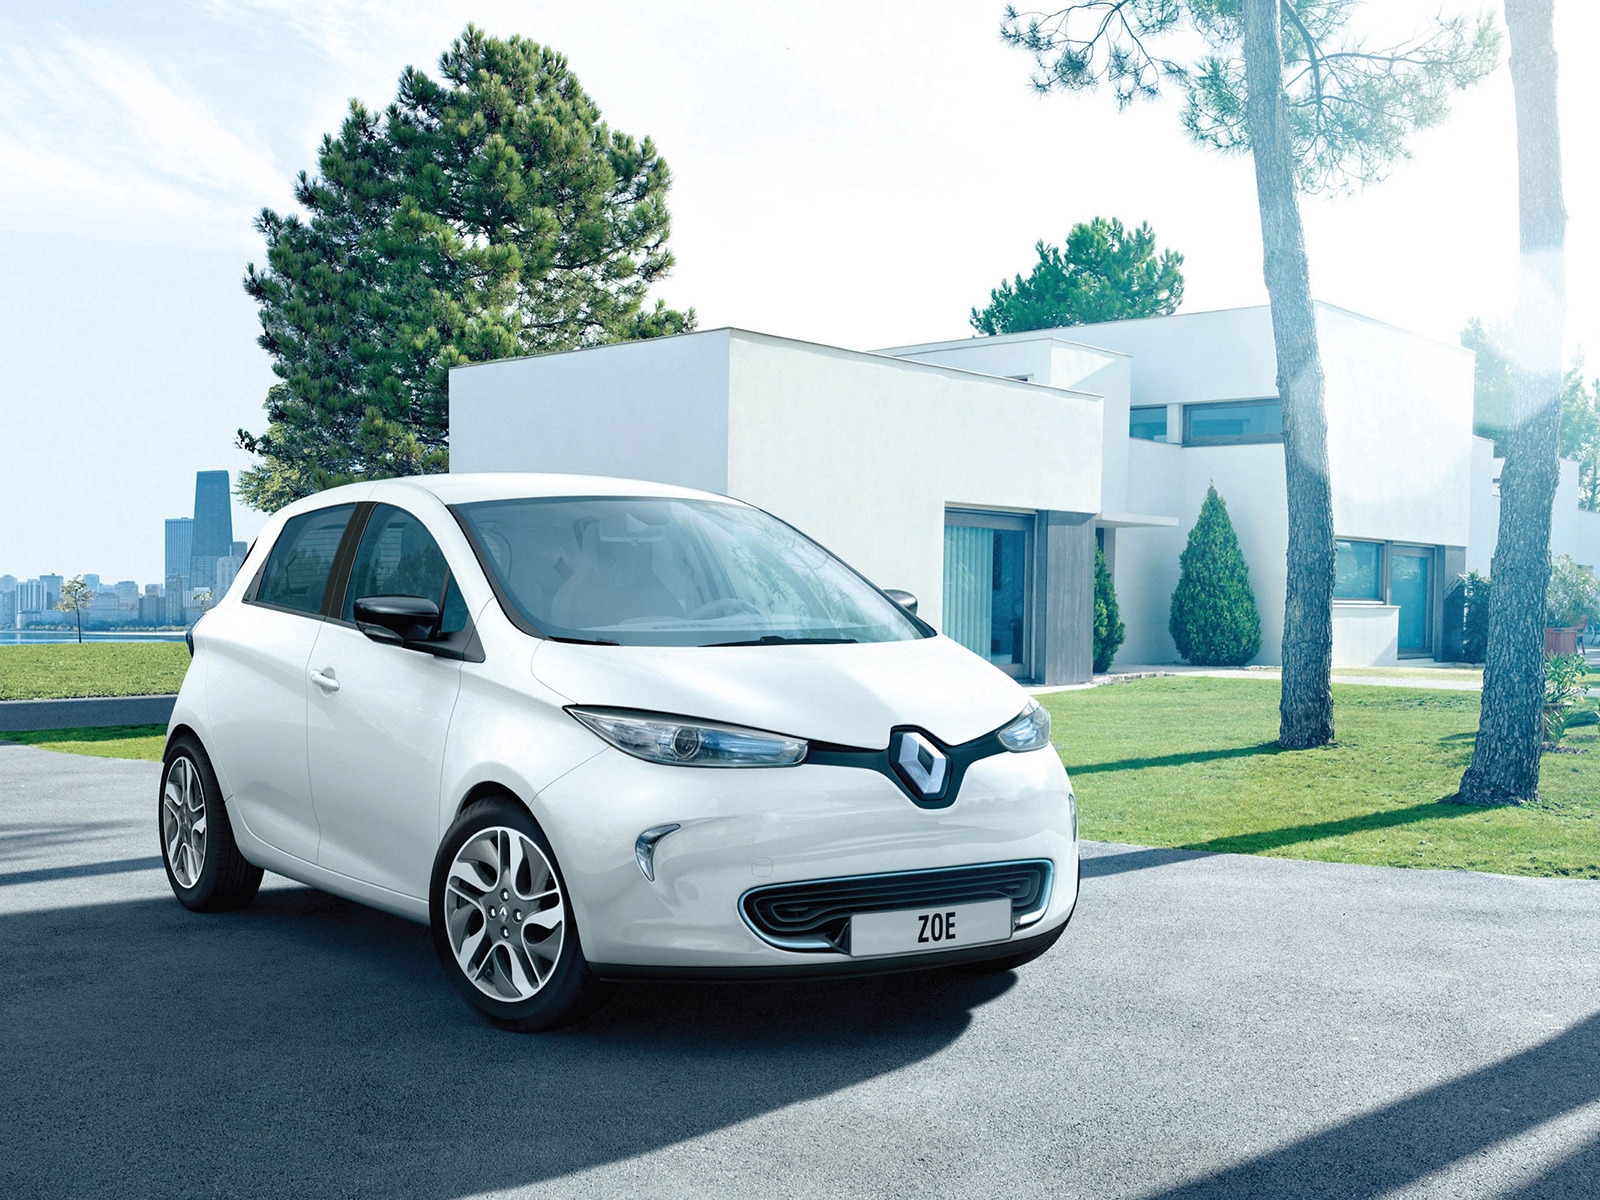 2013 Renault Zoe for 1600 x 1200 resolution